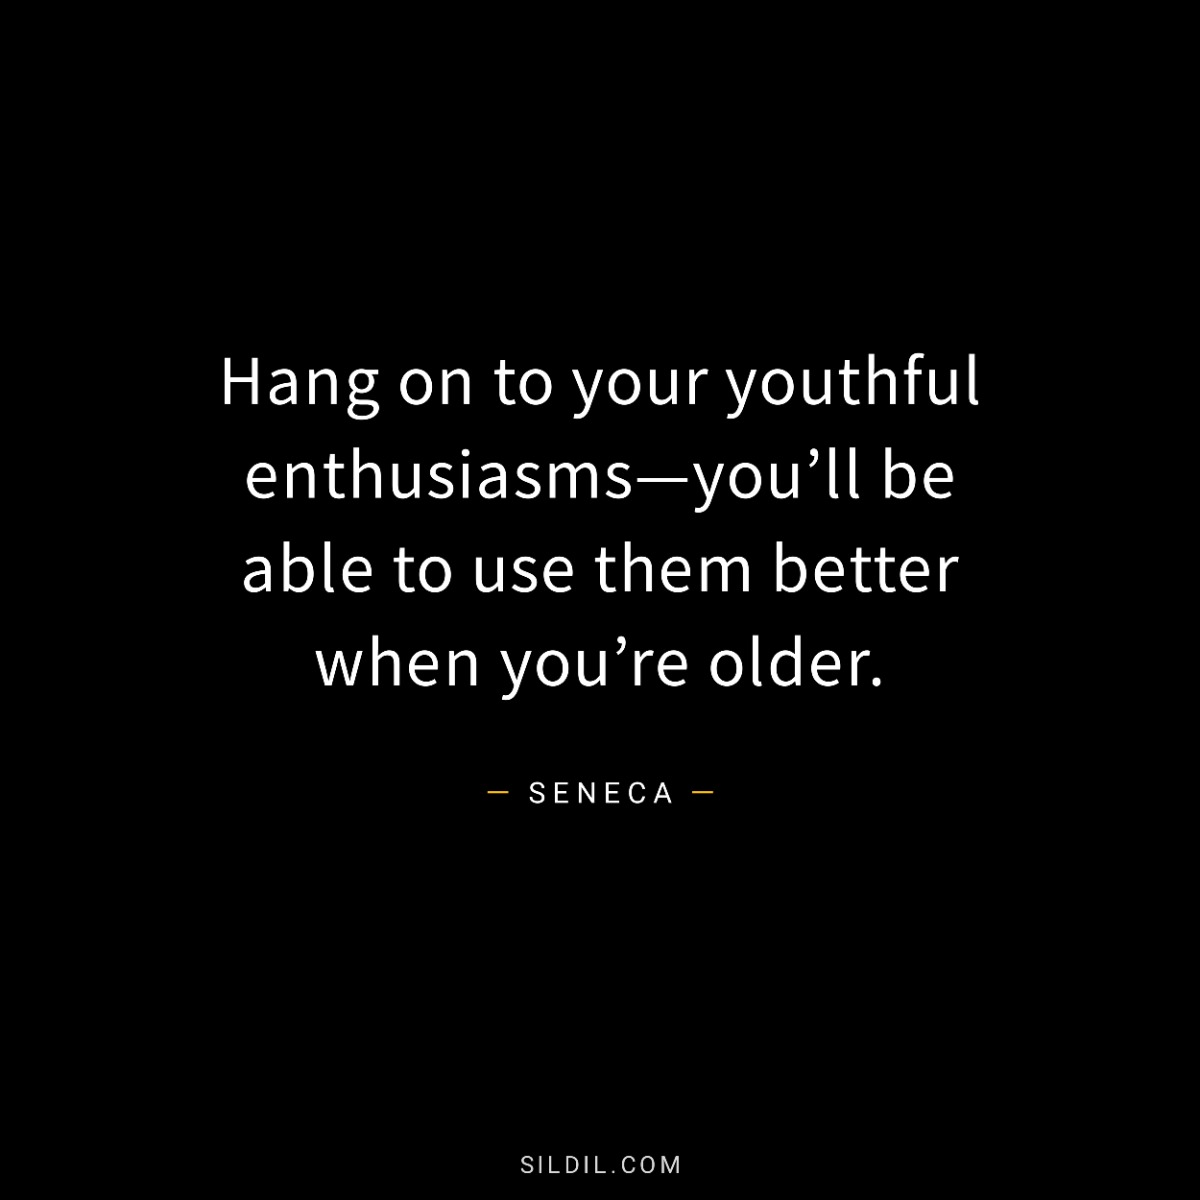 Hang on to your youthful enthusiasms—you’ll be able to use them better when you’re older.